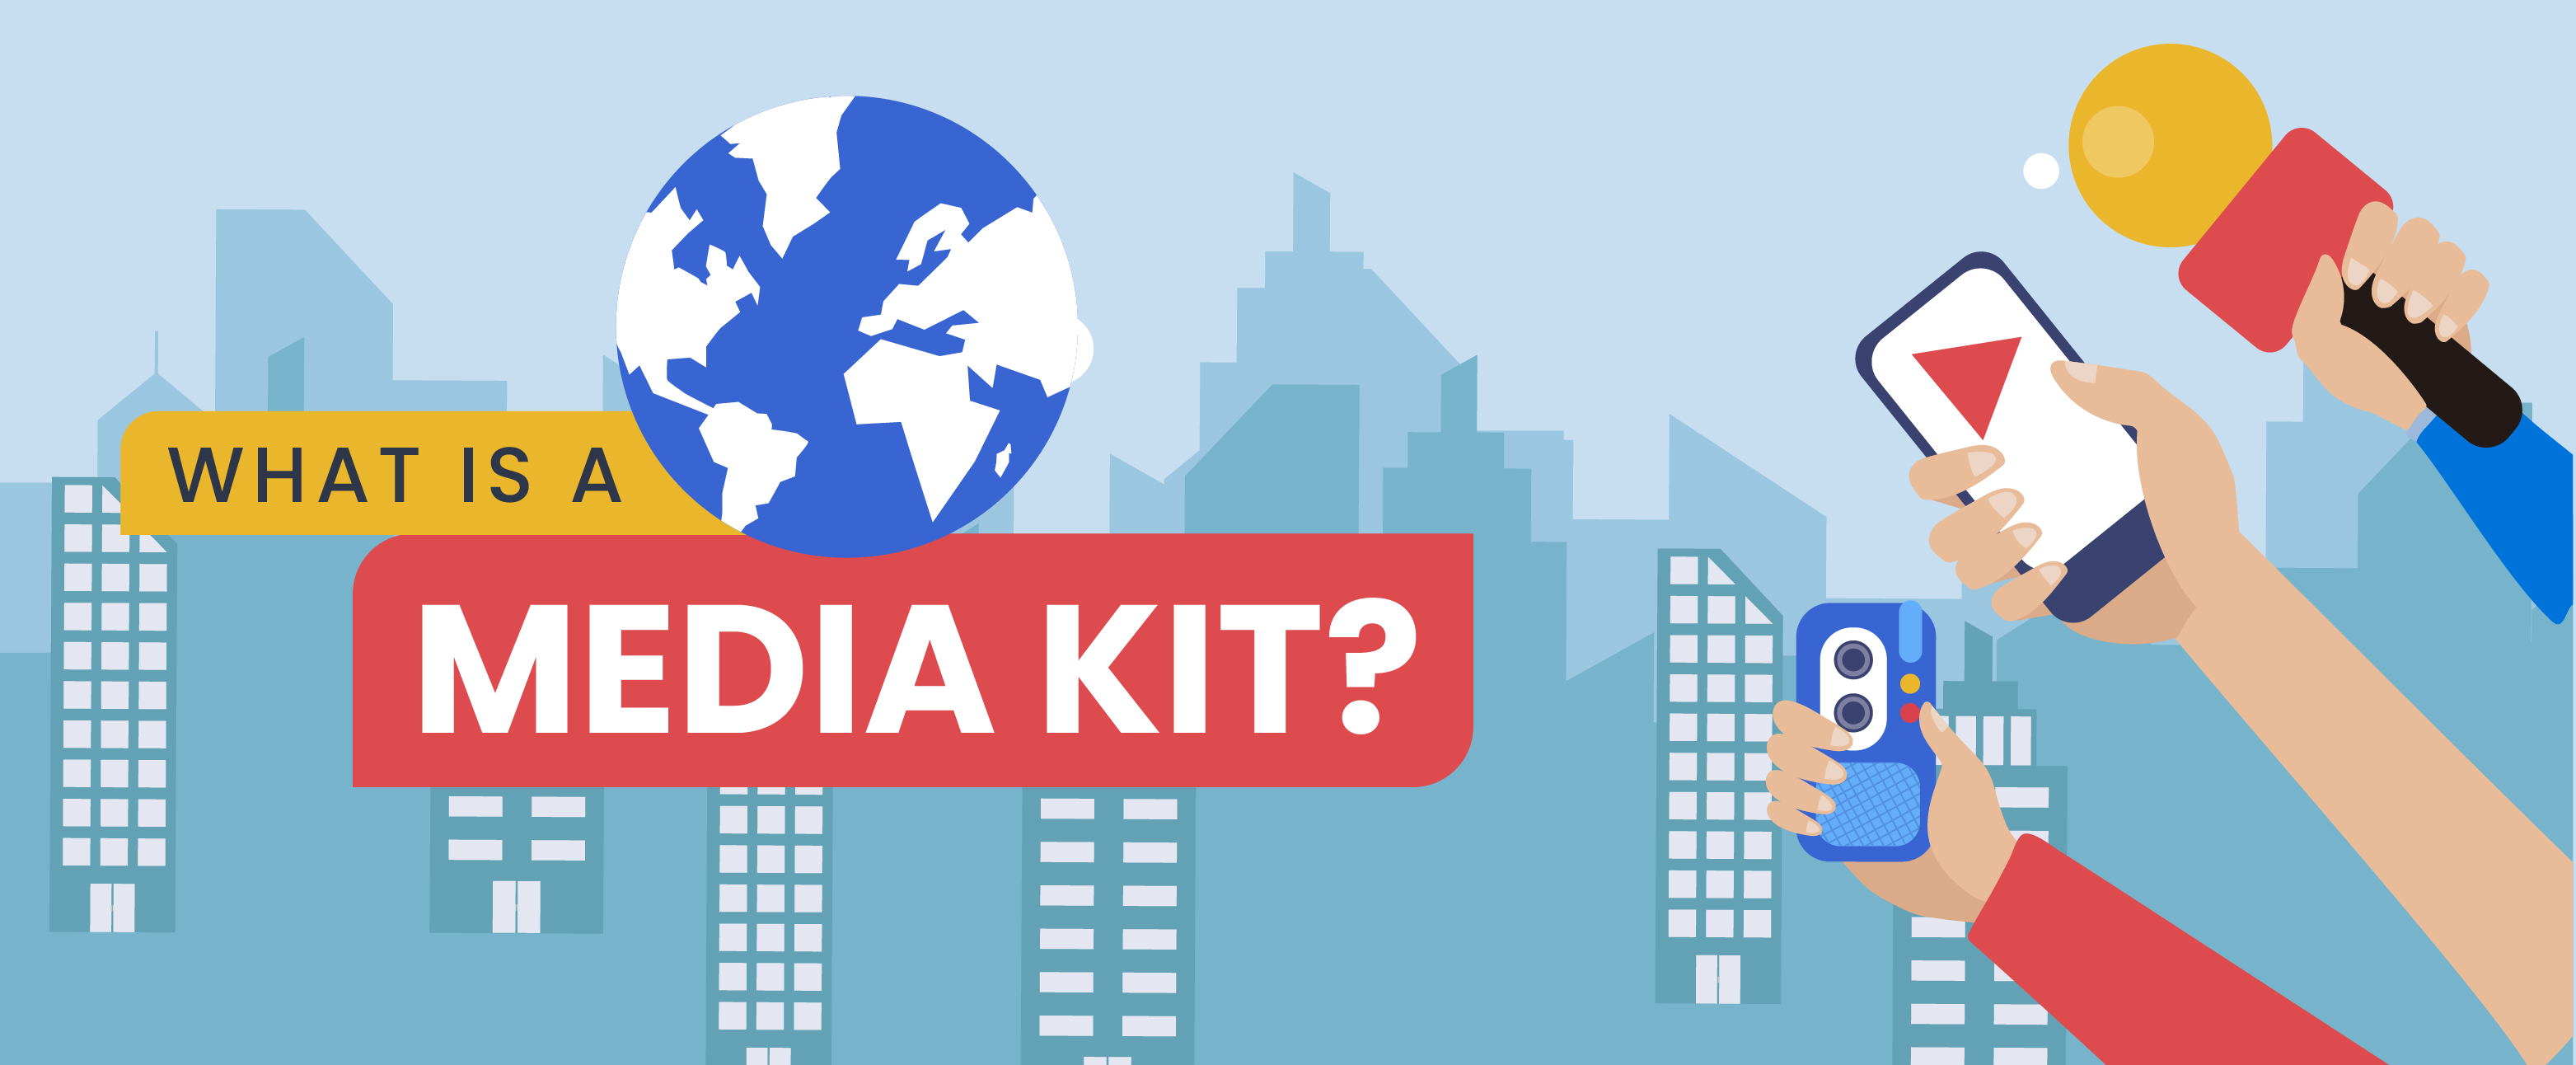 what is a media kit?